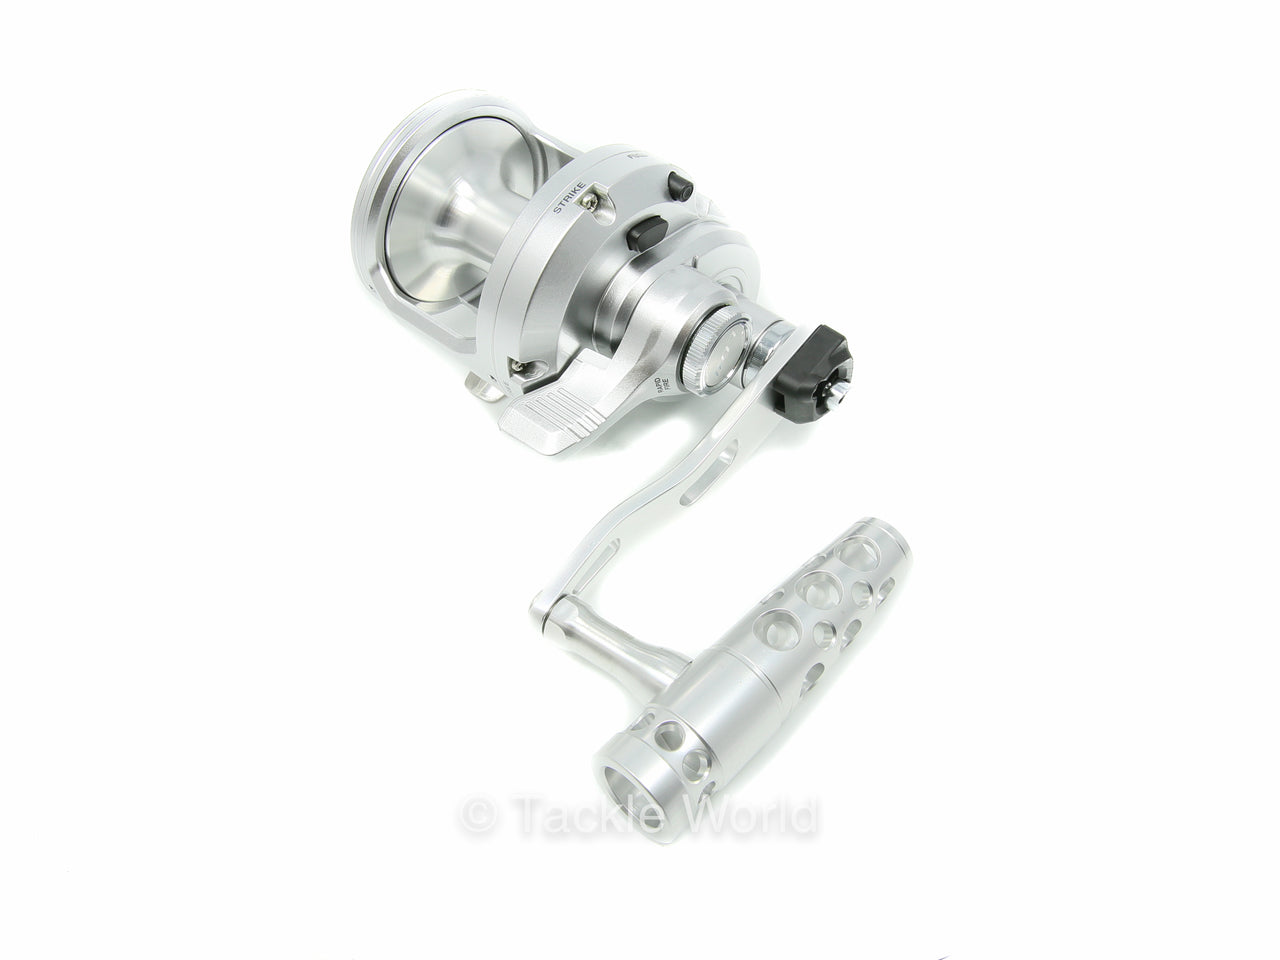 Jigging World Power Handle for Shimano Speedmaster 2-Speed Lever Drag Reels (115mm Silver Arm w/ Silver Aluminum T-Bar)